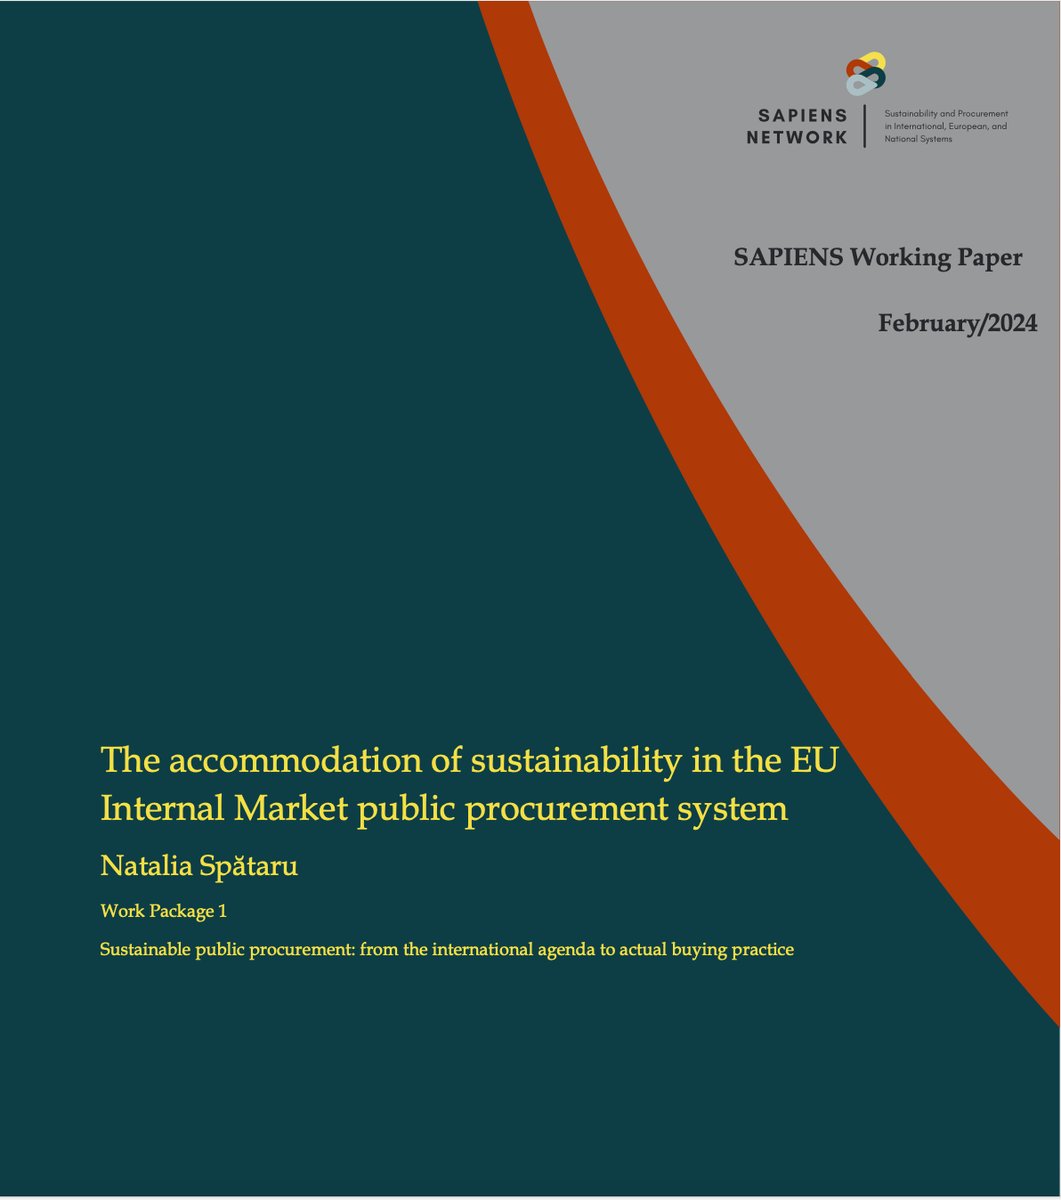 📣 New release: The 3rd paper in our series explores the EU Public Procurement law & sustainability nexus. Natalia Spataru unveils how integrating sustainability can reshape trade and procurement practices for a greener future. 🌱💼 #EUPublicProcurement 🔗lnkd.in/eKVch8UX